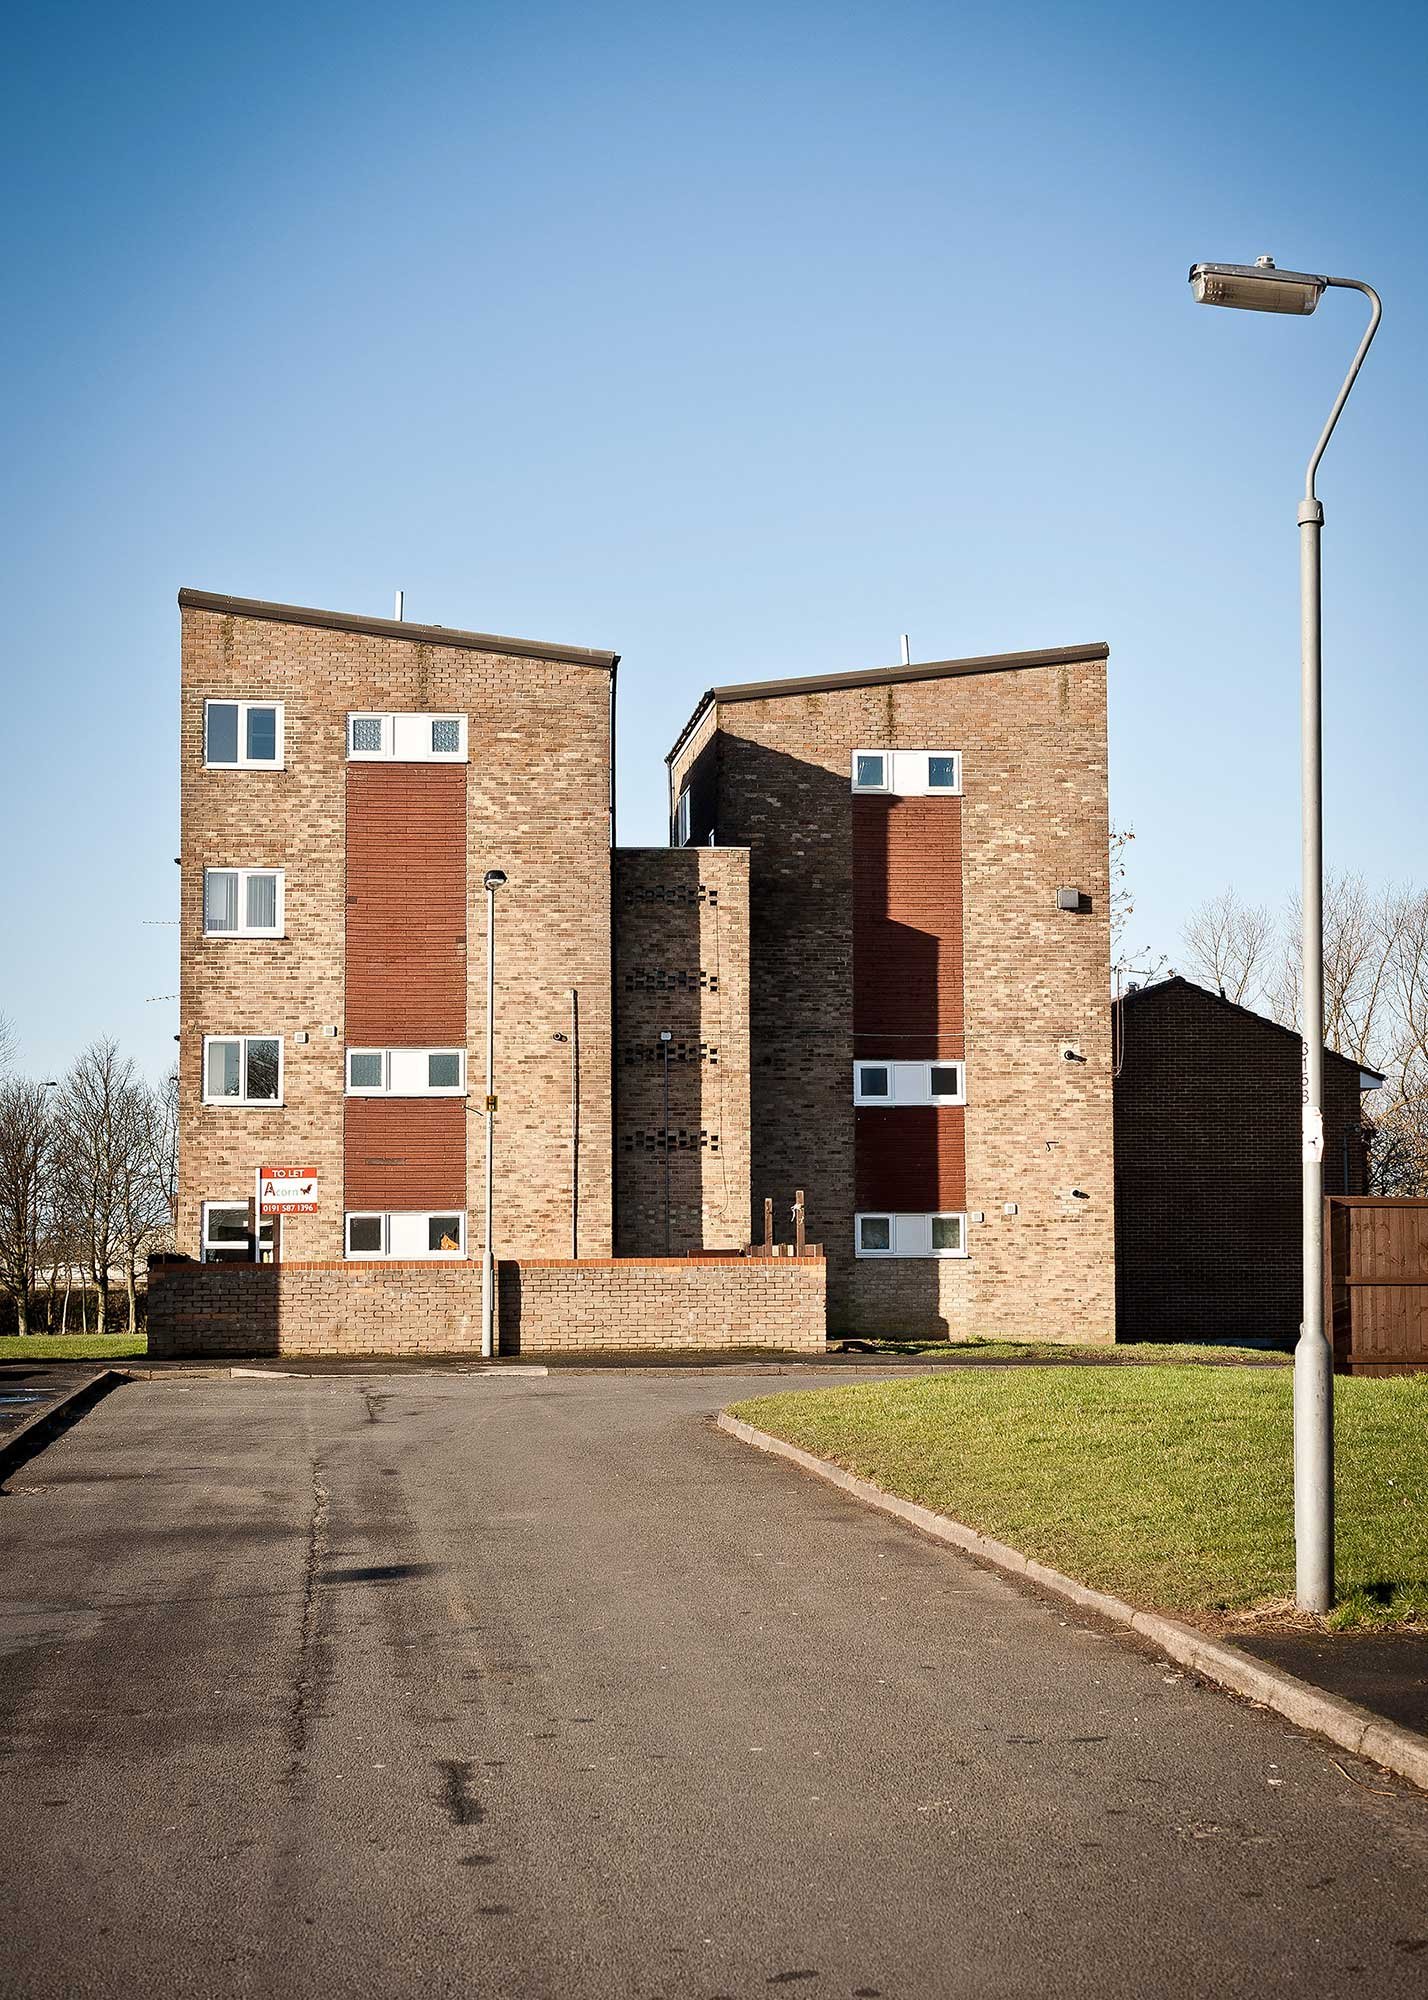 Peterlee housing designed by George Grenfell-Baines